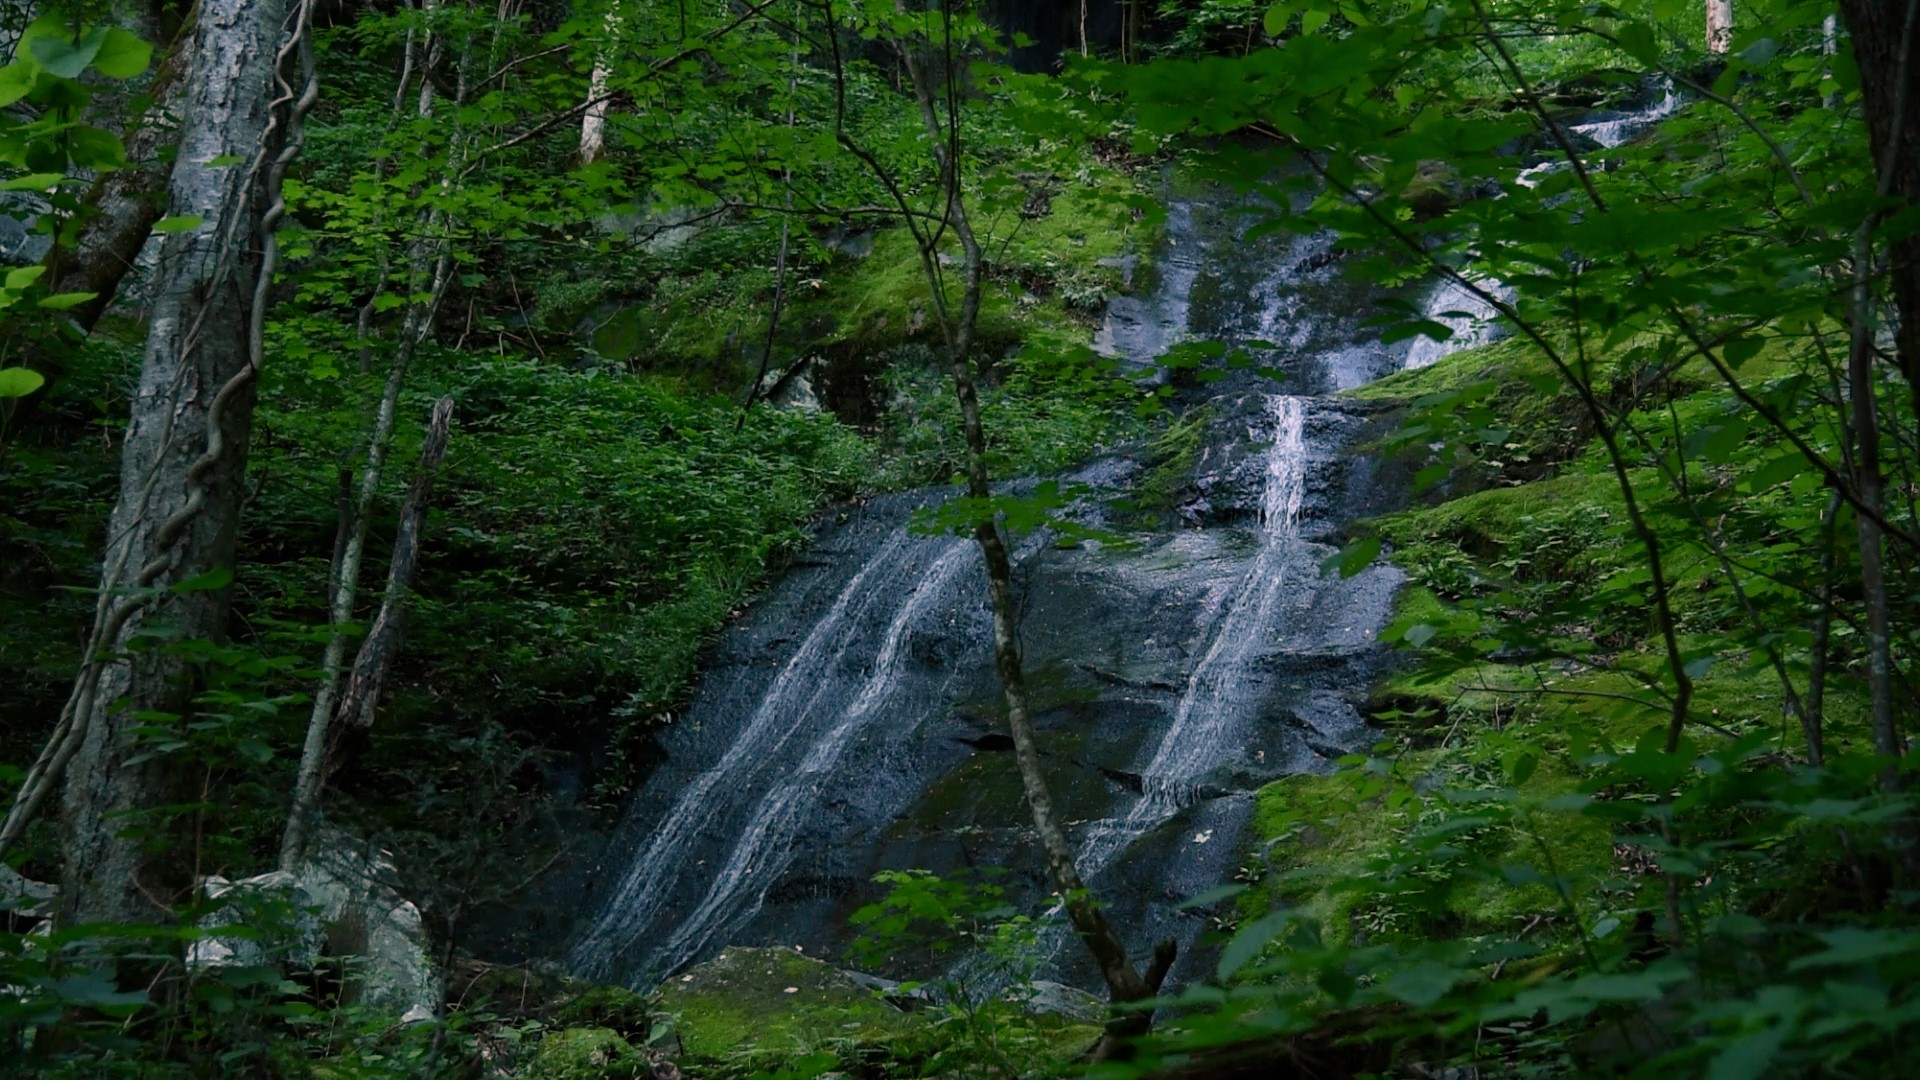 Porters Creek Trail is an easy to moderately difficult trek at roughly 4 miles roundtrip to Fern Branch Falls in the Great Smoky Mountains' Greenbrier area.